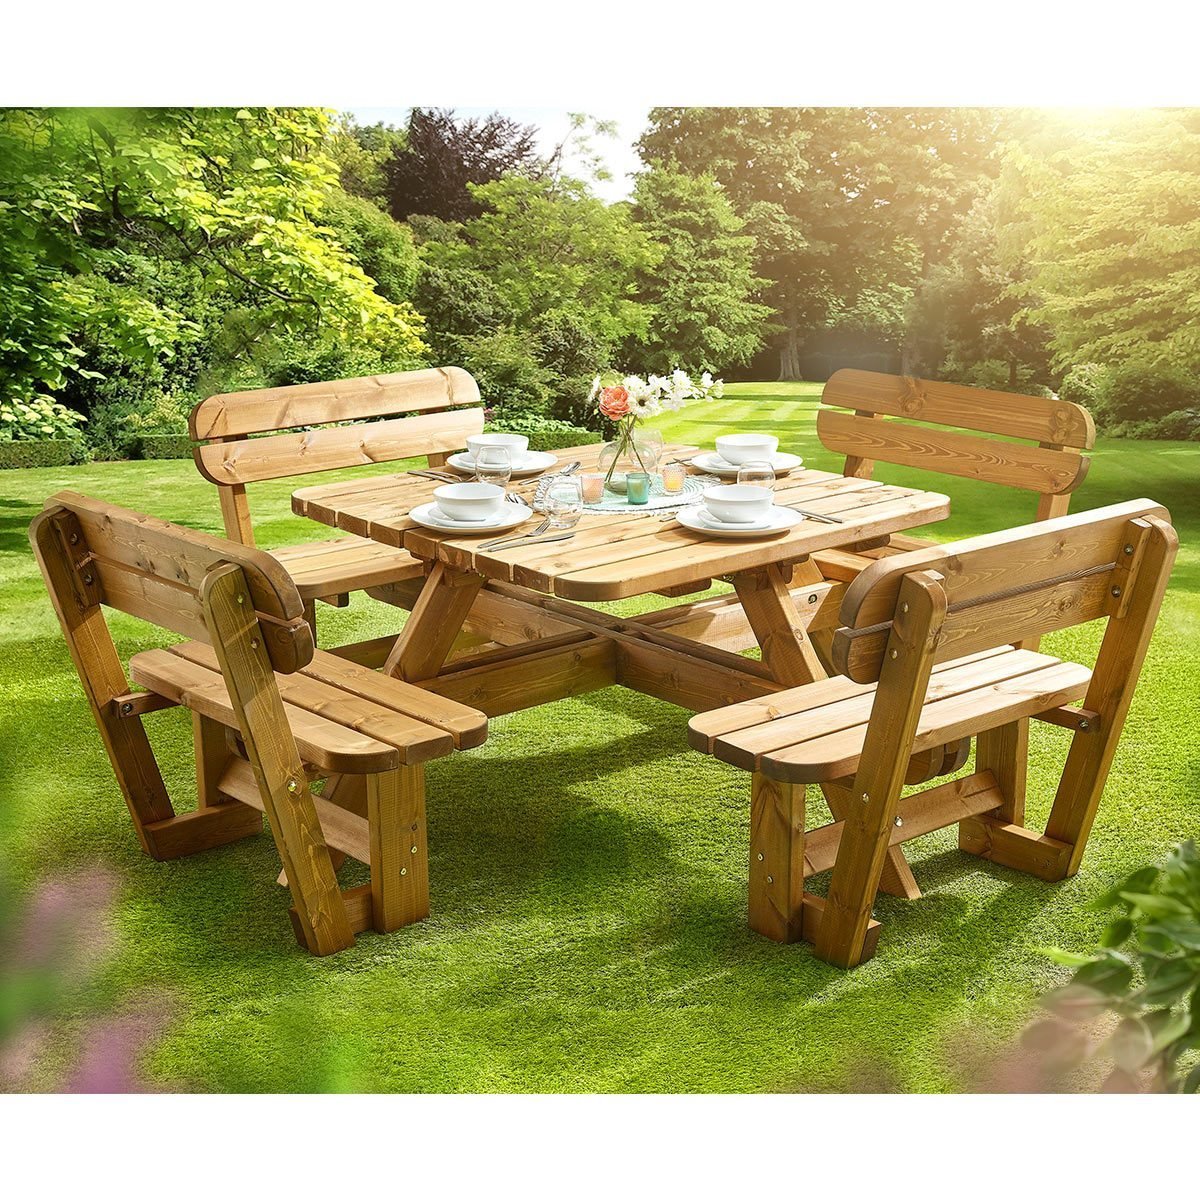 Anchor Fast 8 Seater Pine Wood Picnic Bench